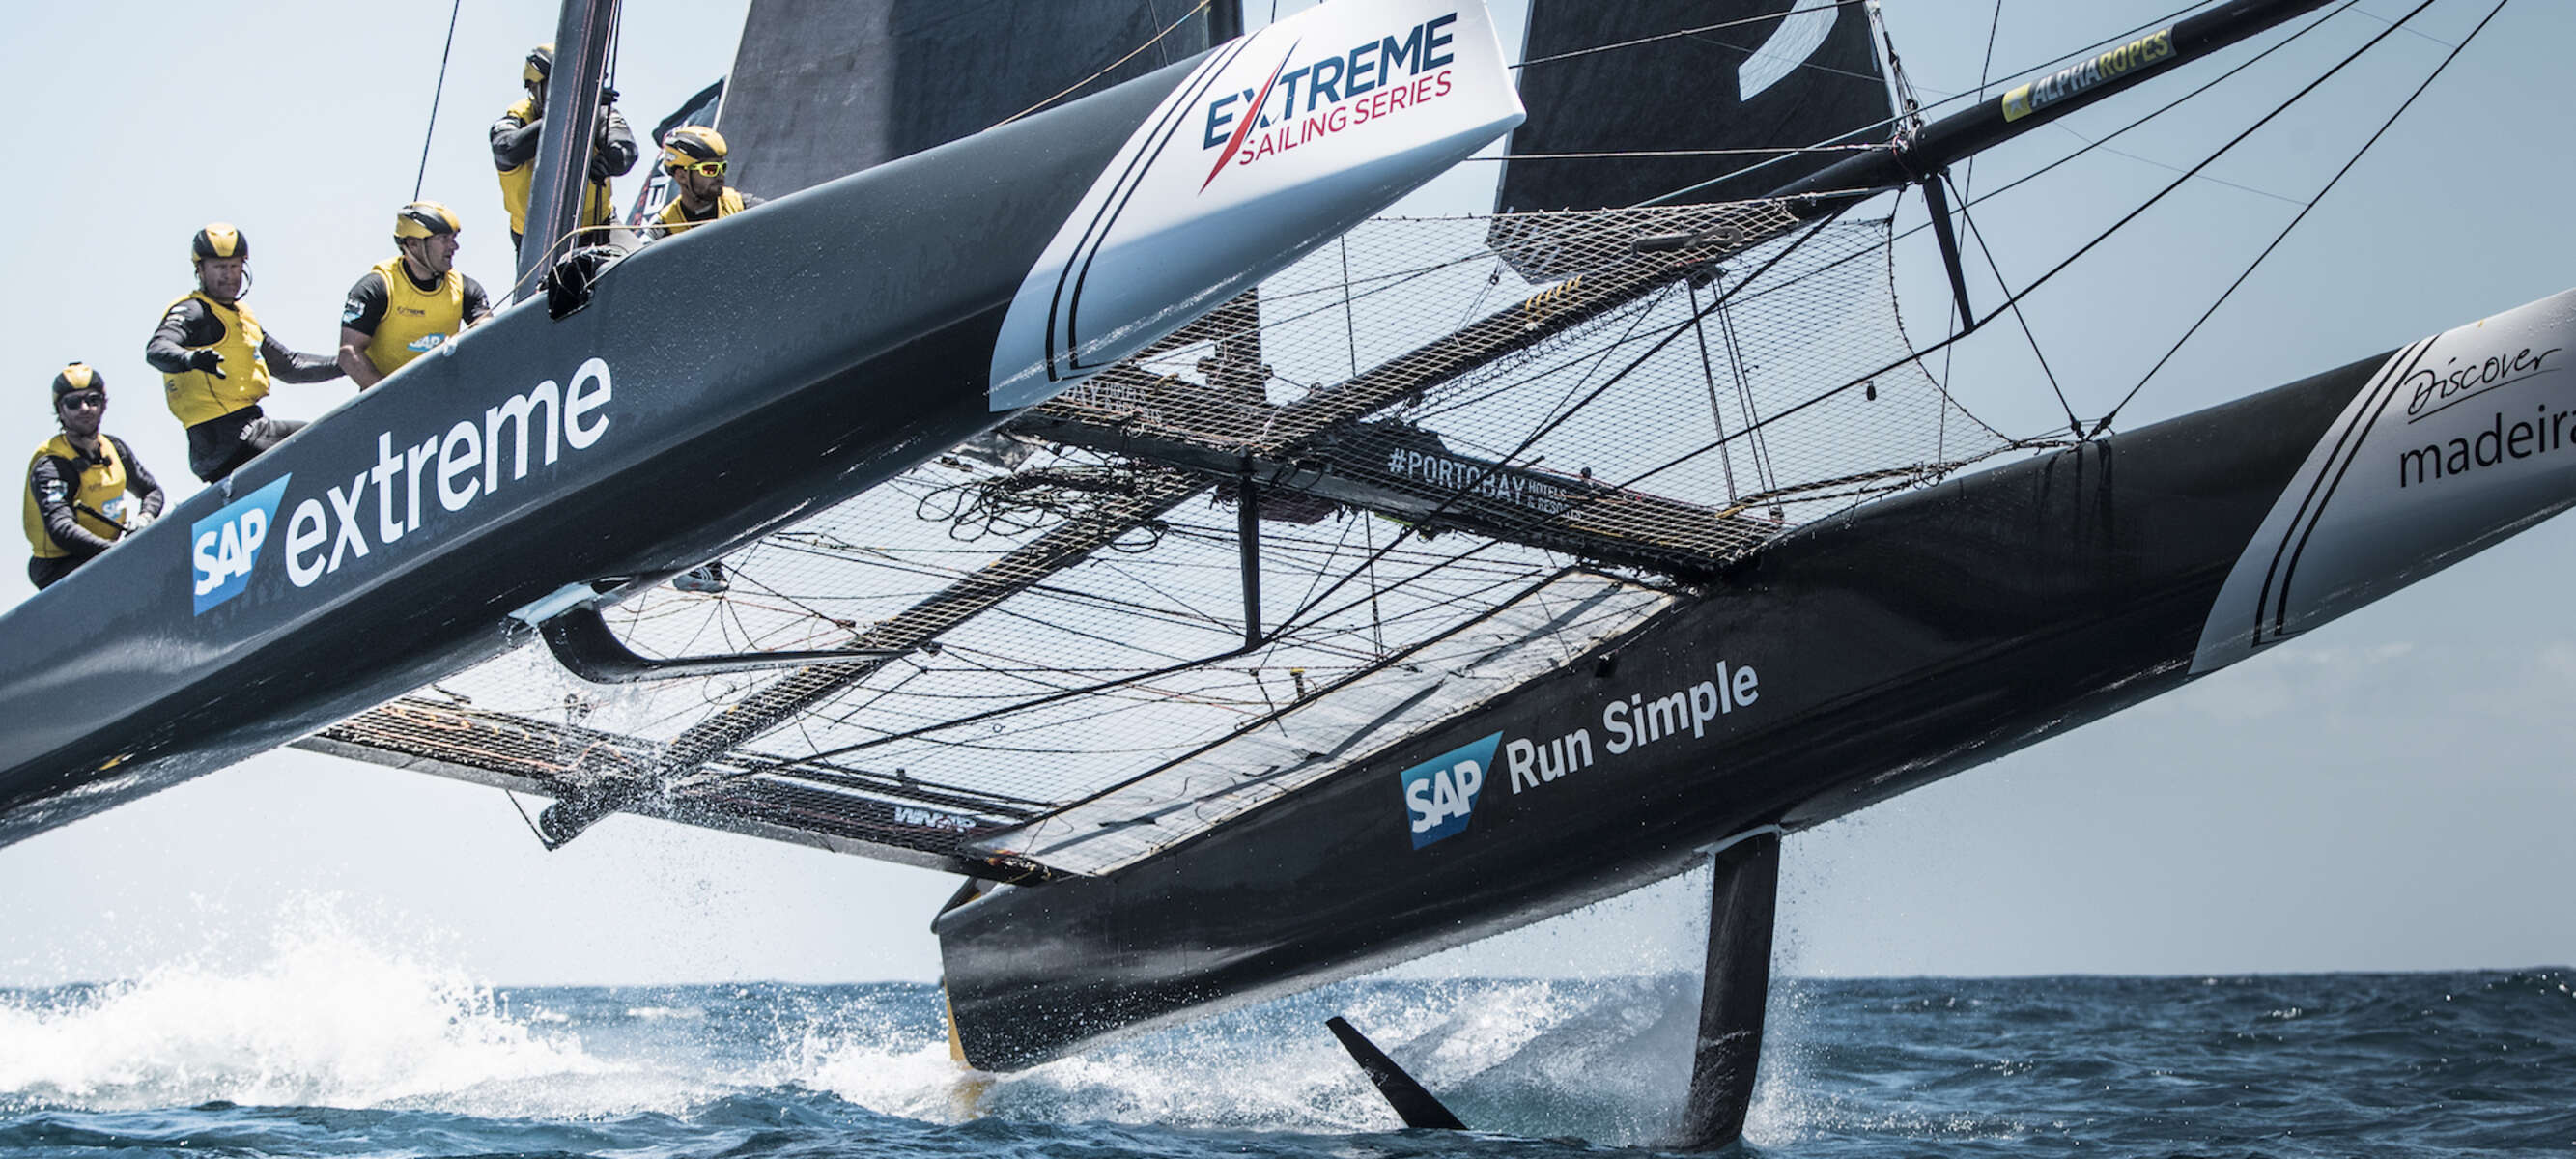 19-facts-about-extreme-sailing-series